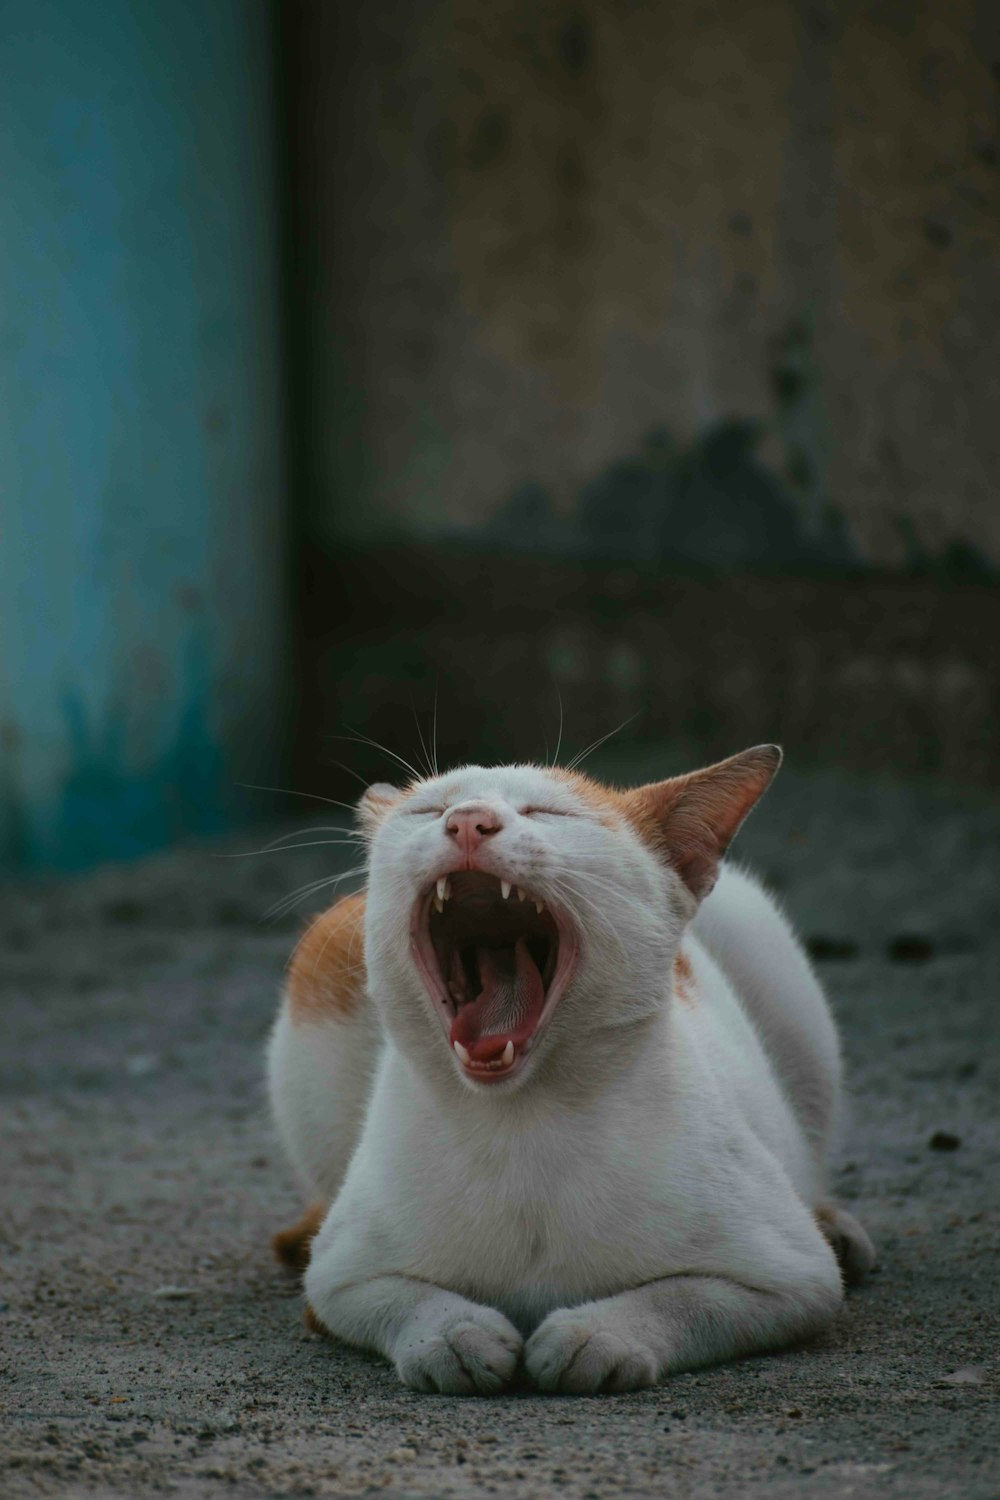 a cat yawning on the ground